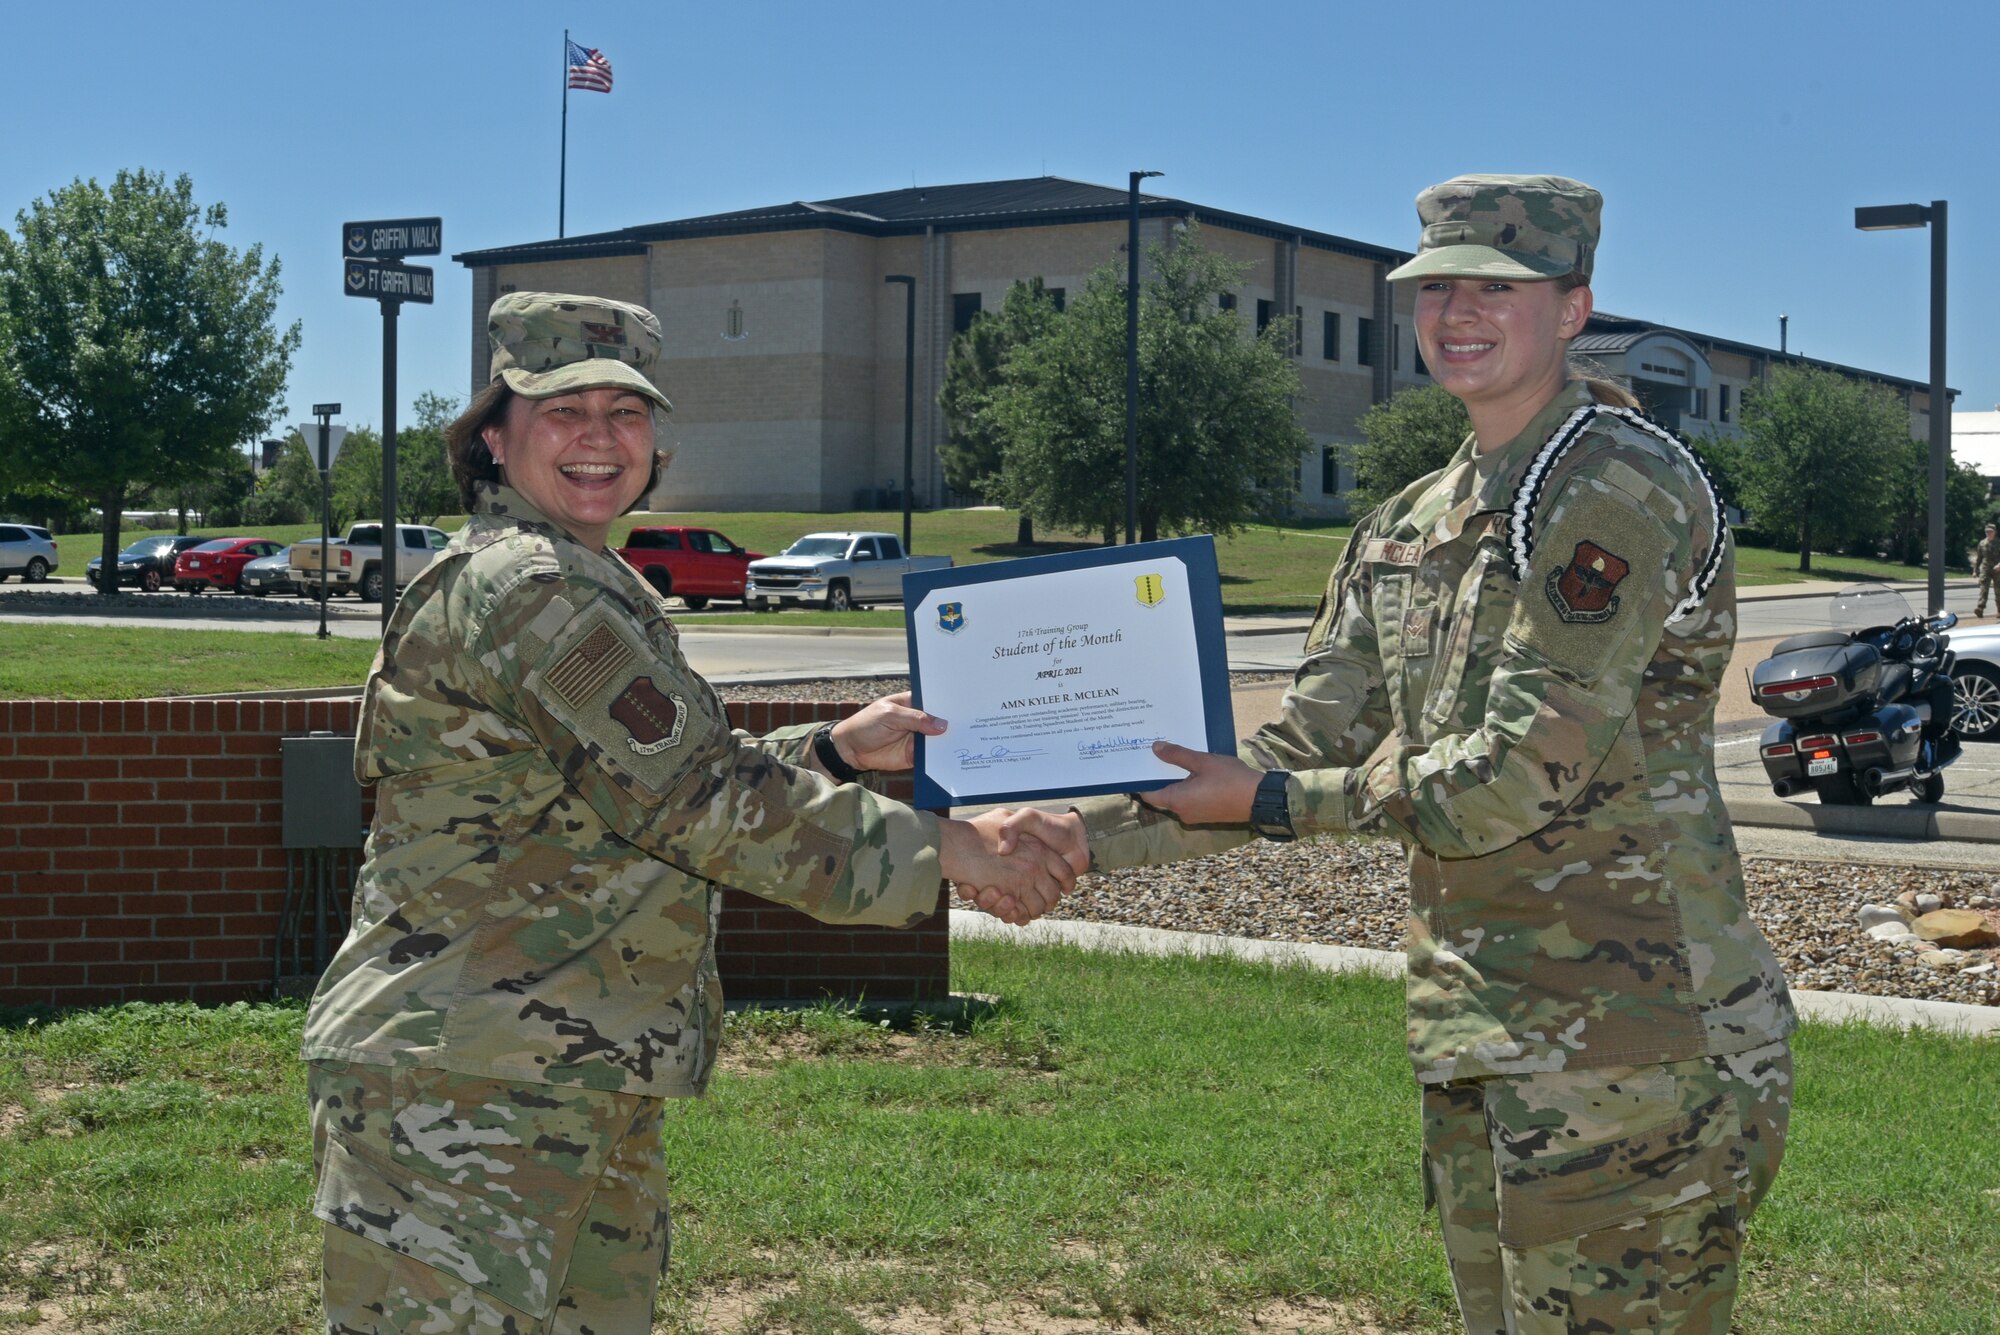 U.S. Air Force Col. Angelina Maguinness, 17th Training Group commander, presents Airman Kylee Mclean, 315th Training Squadron student, the 17th TRG Student of the Month award for April 2021, outside of the Brandenburg Hall on Goodfellow Air Force Base, Texas, May 21, 2021. Mclean worked hard for her award and has shown her dedication to her squadron and the training she received at Goodfellow. (U.S. Air Force photo by Senior Airman Ashley Thrash)